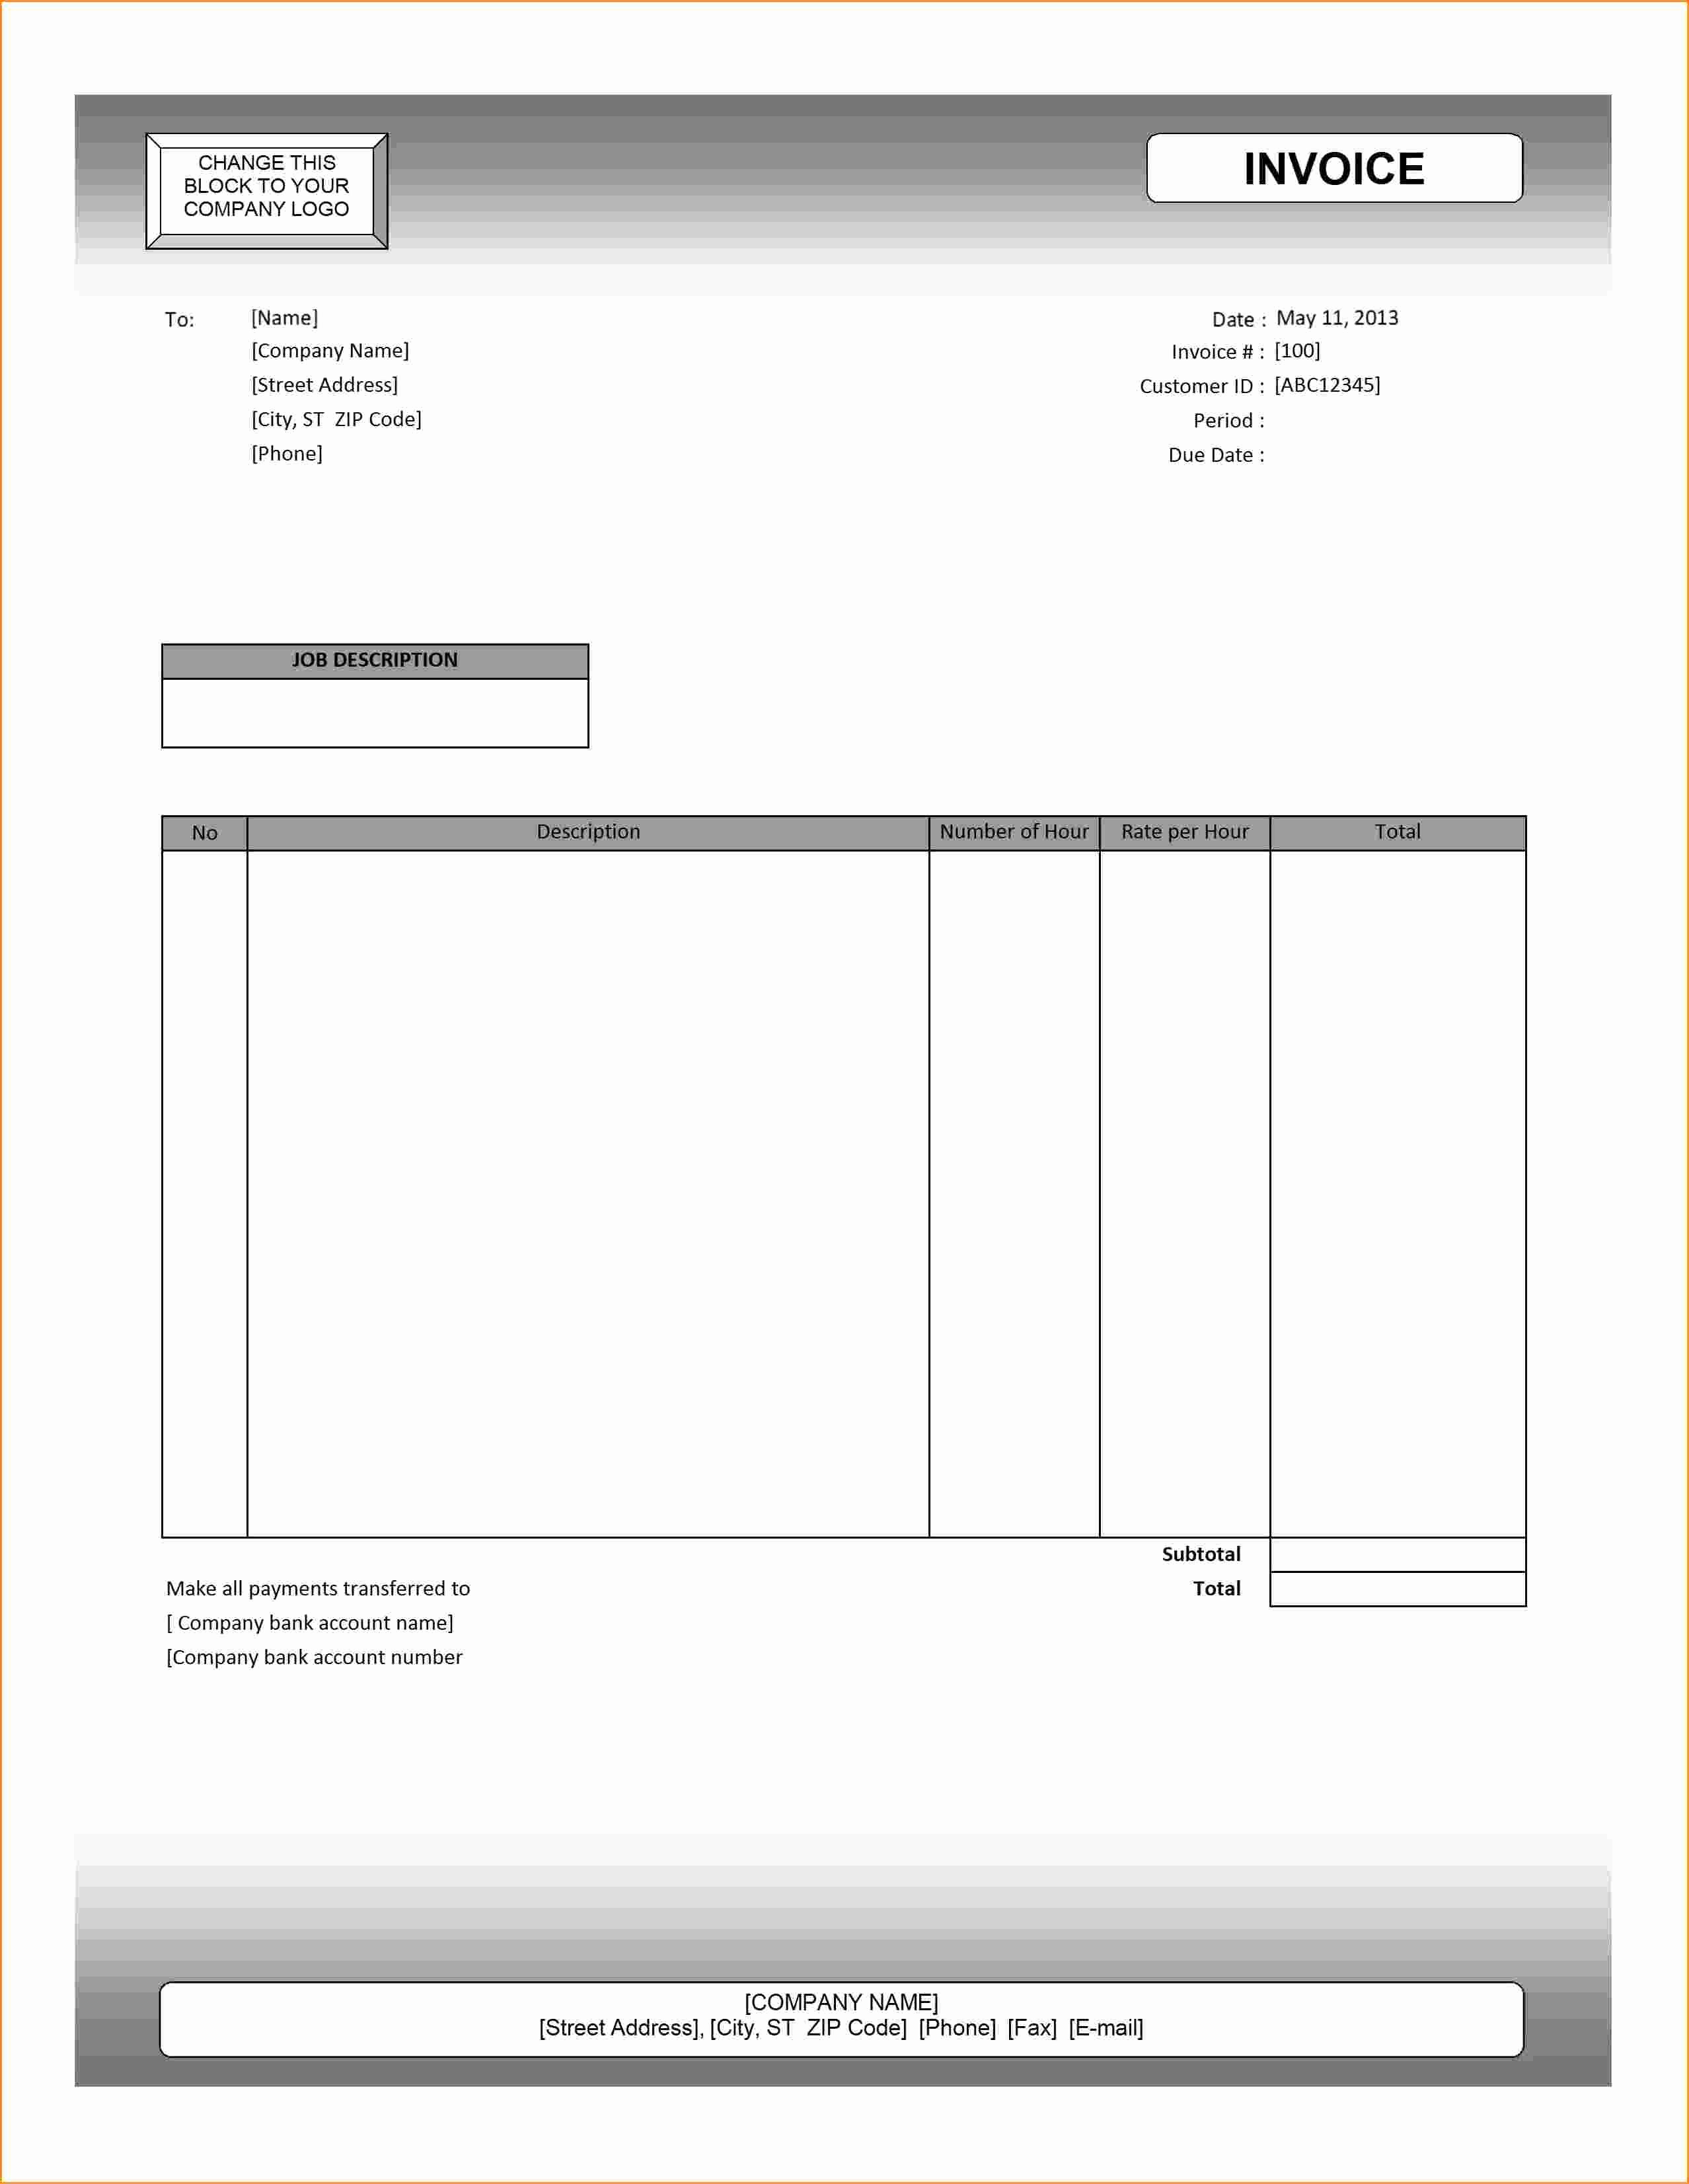 Excel Invoice Template with Logo Best Of Word Doc Logo Okl Mindsprout Co Invoice Template with Best